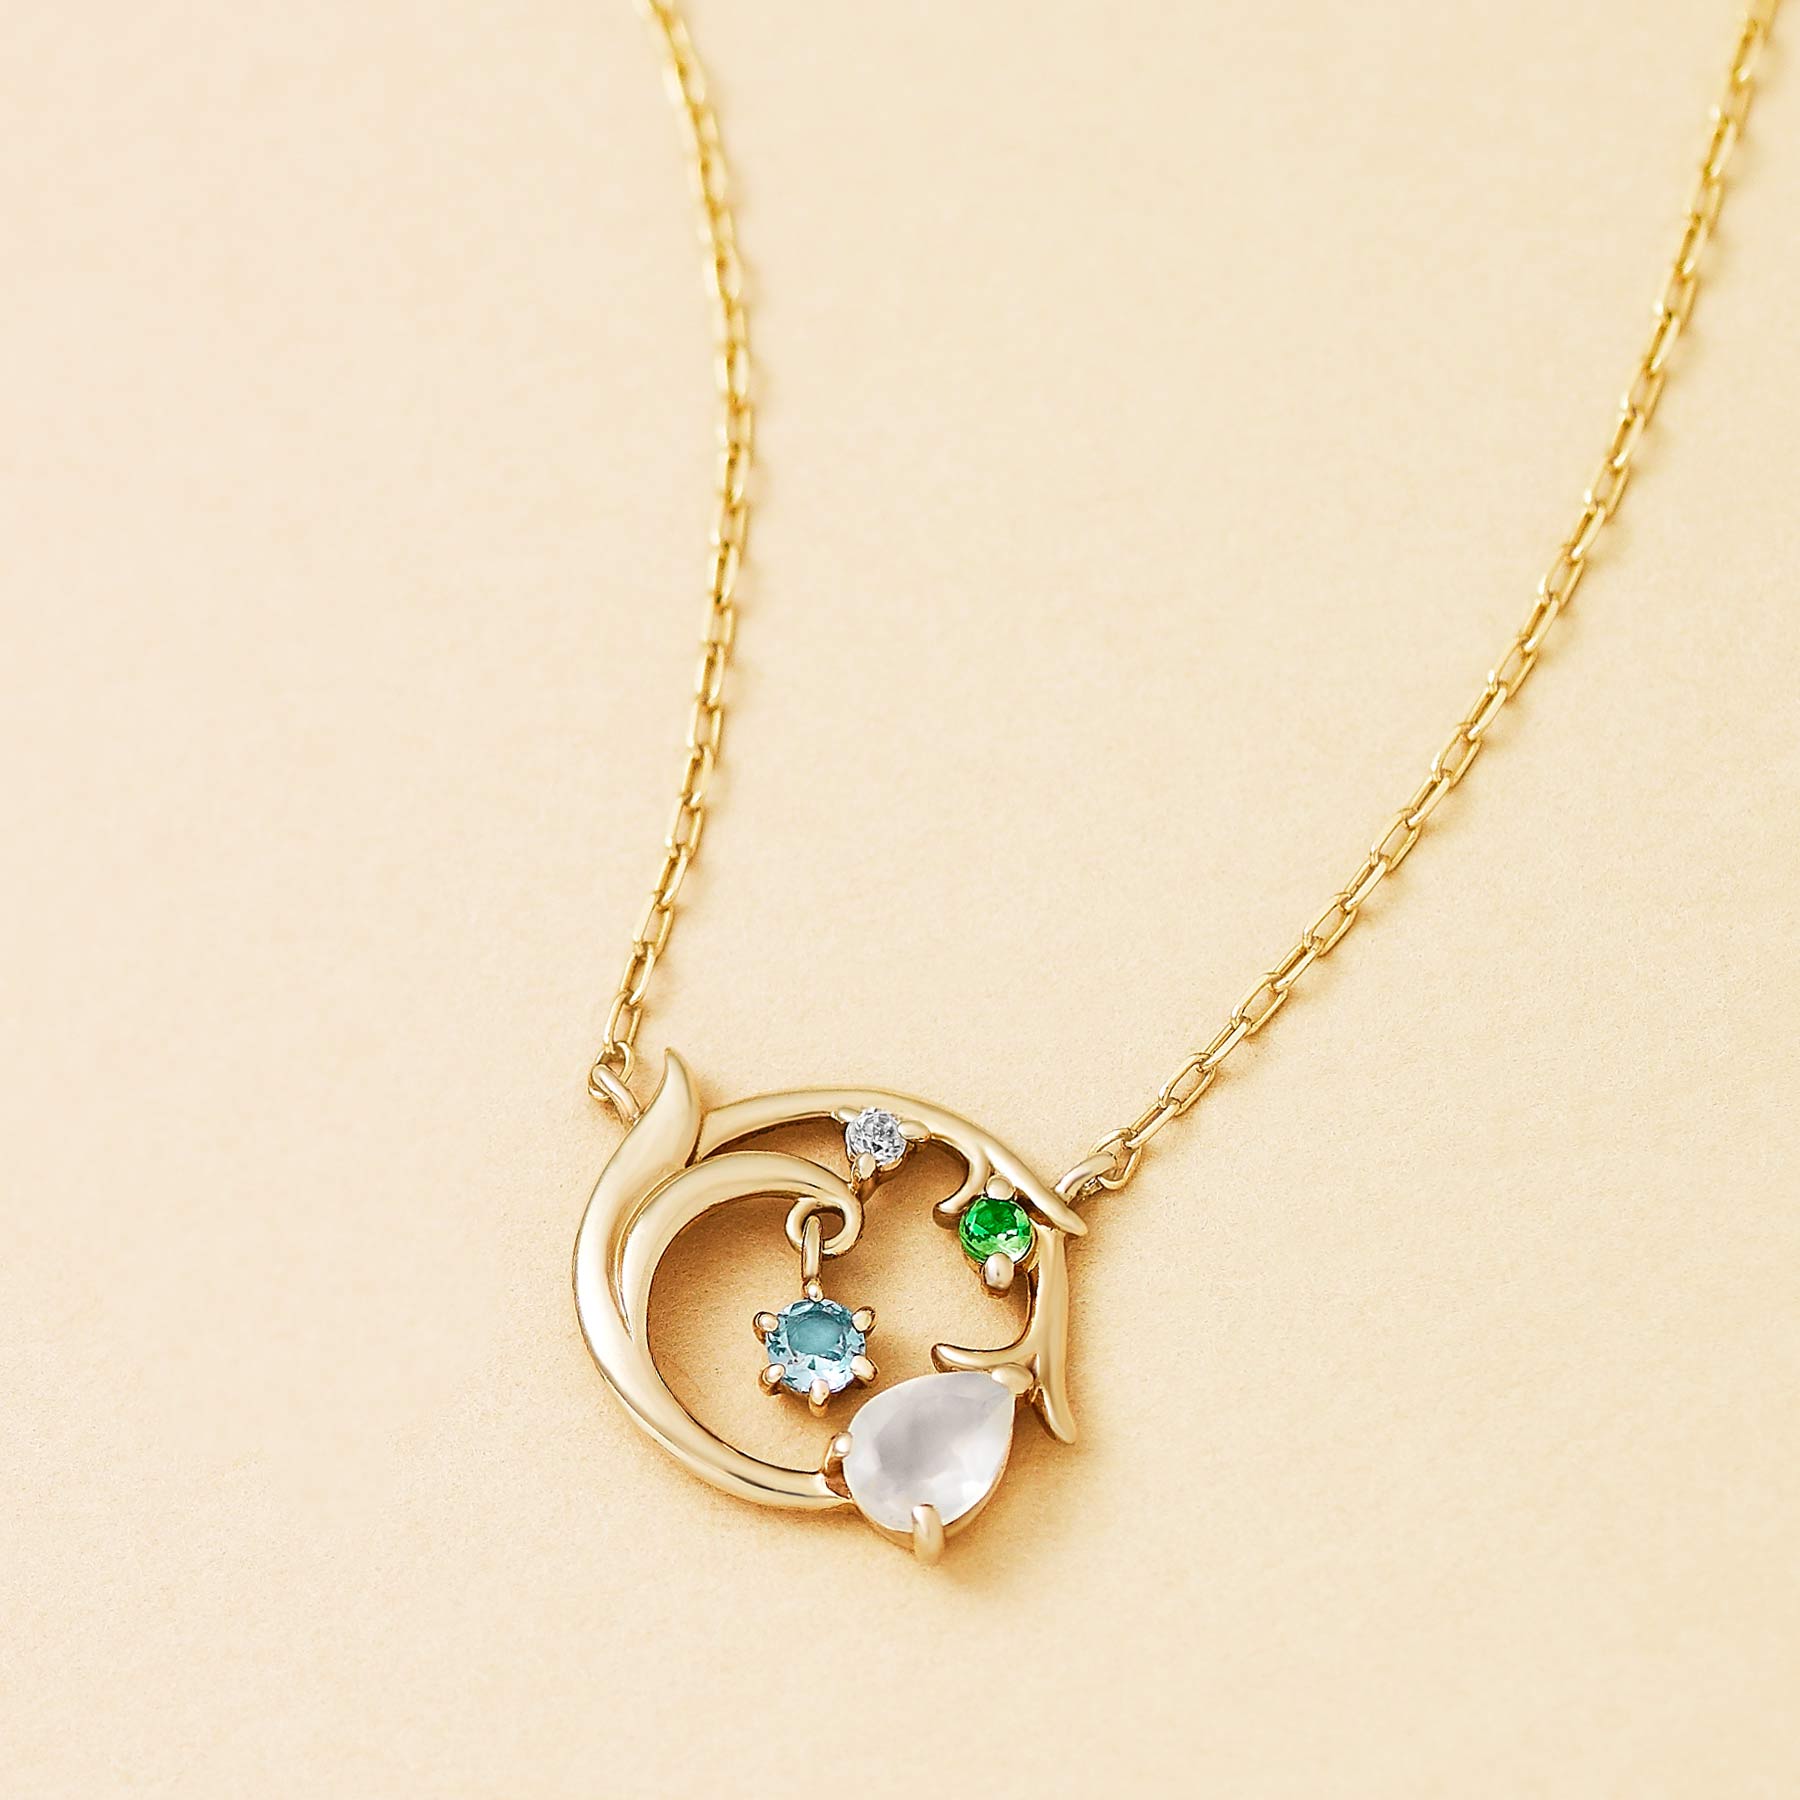 [Birth Flower Jewelry] January Snowdrop Necklace - Product Image